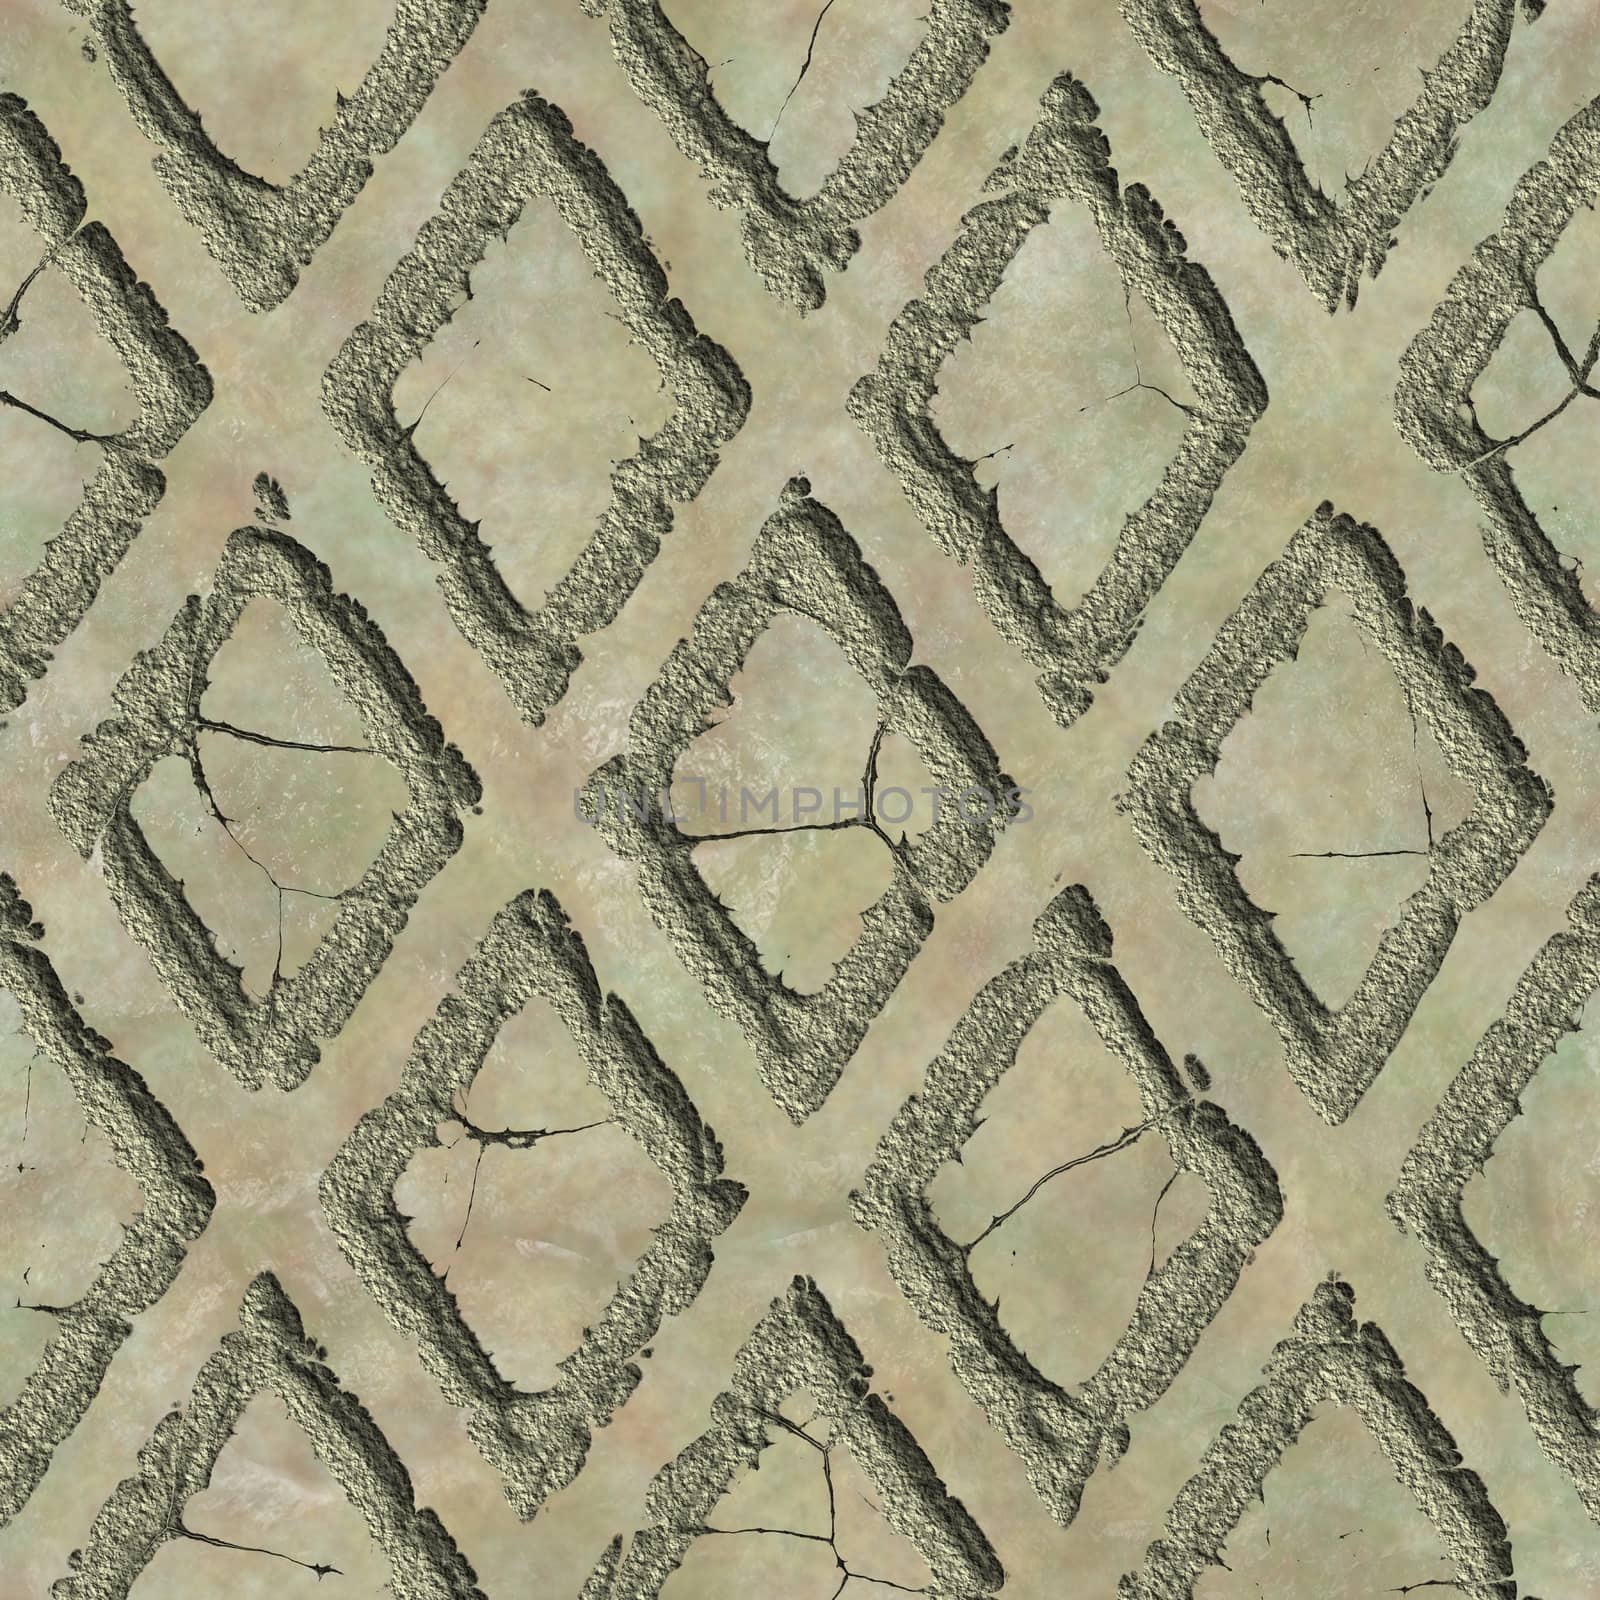 Cracked stone, abstract 3d rendered seamless background pattern.